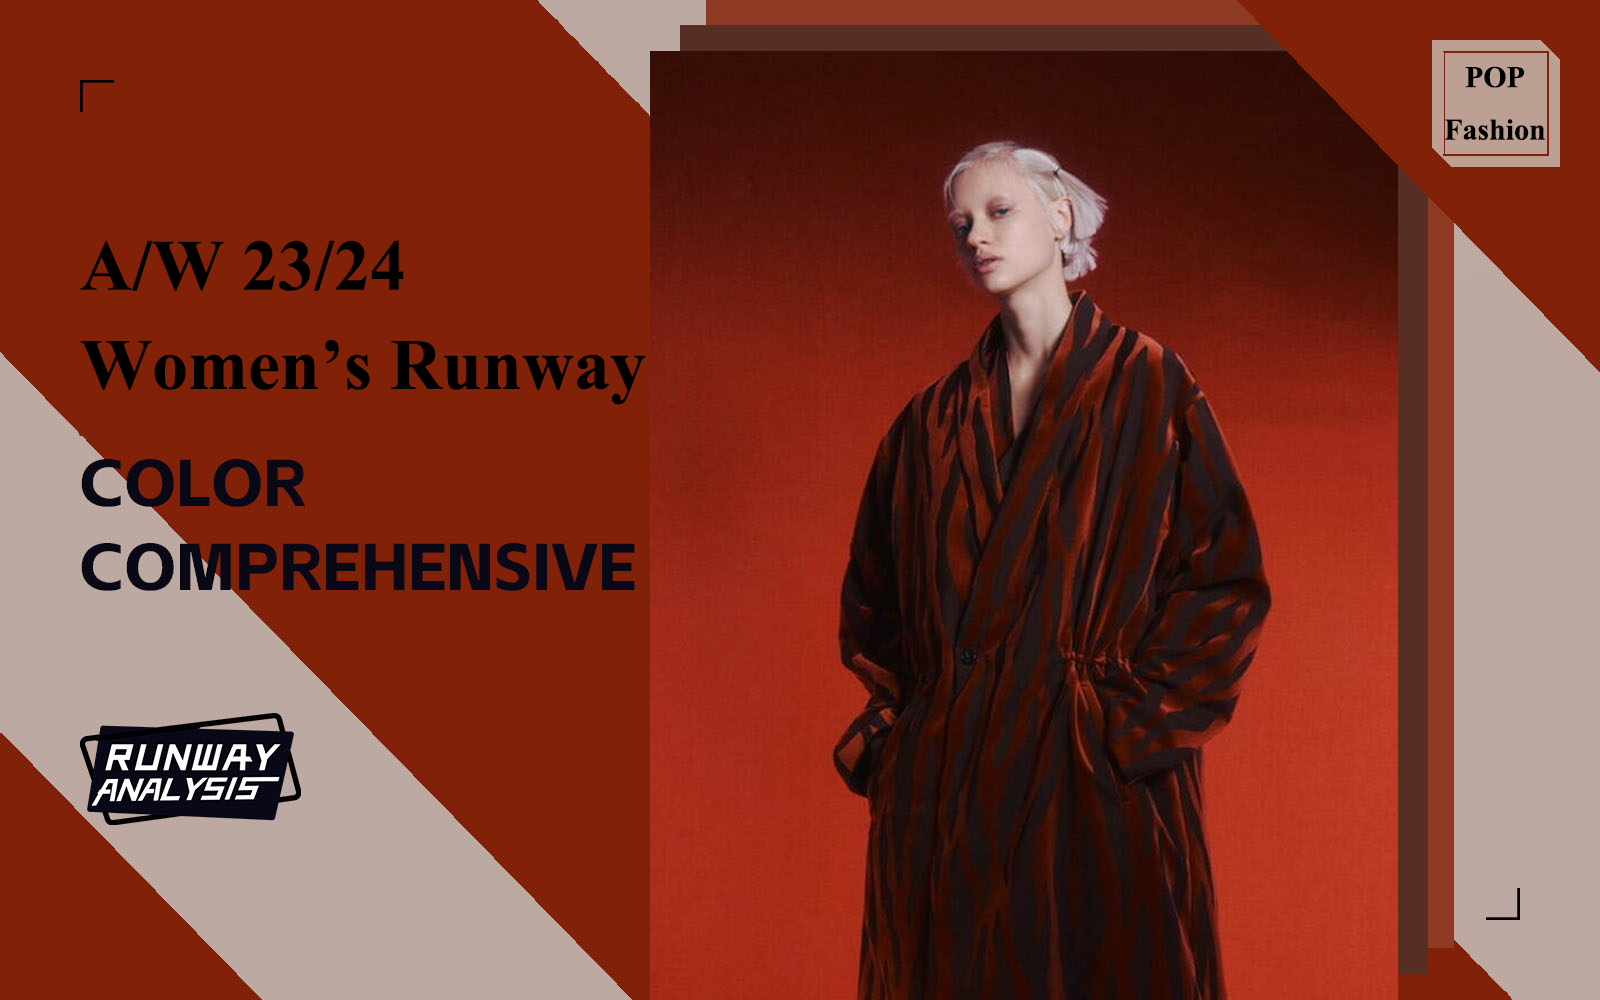 A/W 23/24 Key Colors -- The Comprehensive Runway Analysis of Womenswear(Part One)